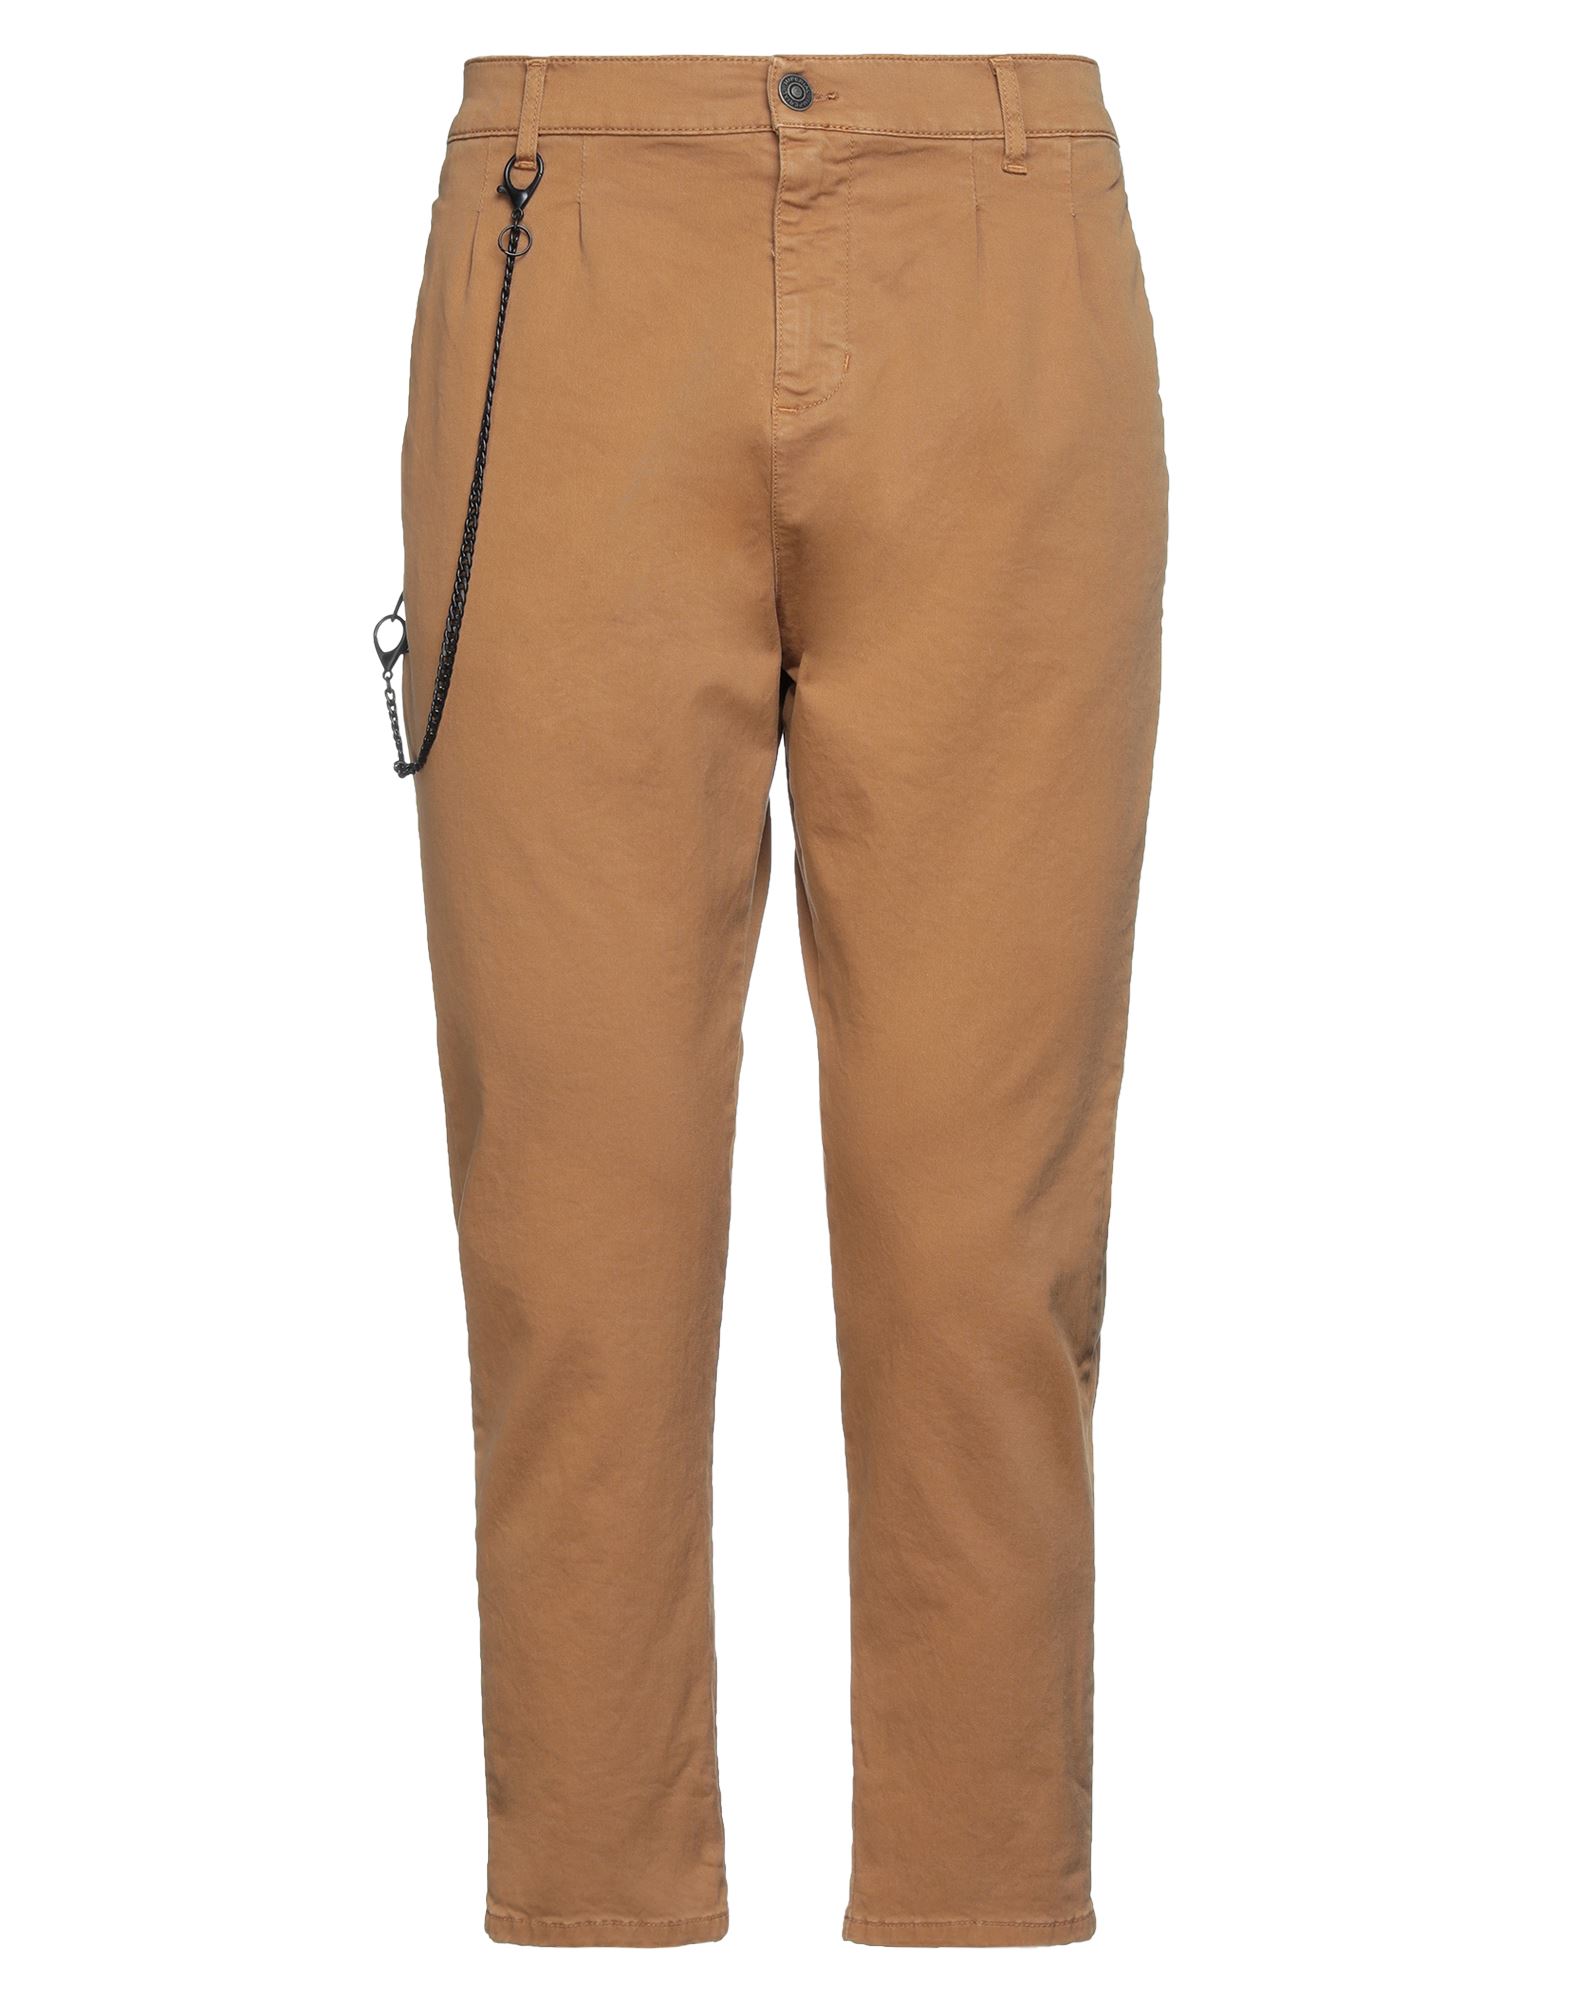 IMPERIAL IMPERIAL MAN PANTS CAMEL SIZE 36 COTTON, ELASTANE,13581473UP 3